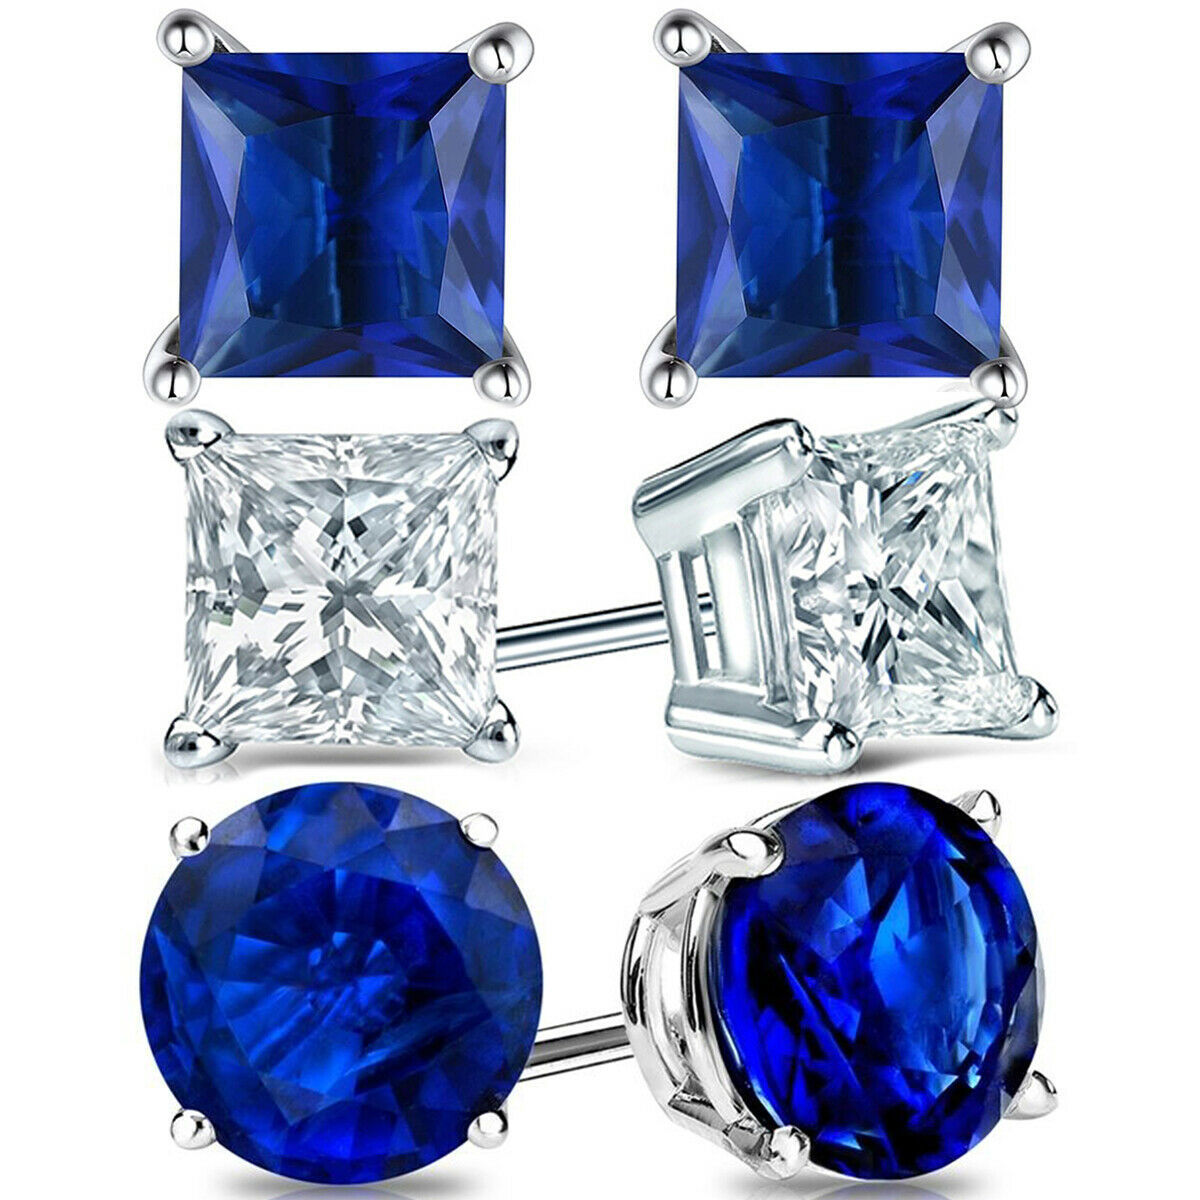 Princess Cut Simulated Blue Sapphire Solitaire Stud Earrings 14K White Gold Over